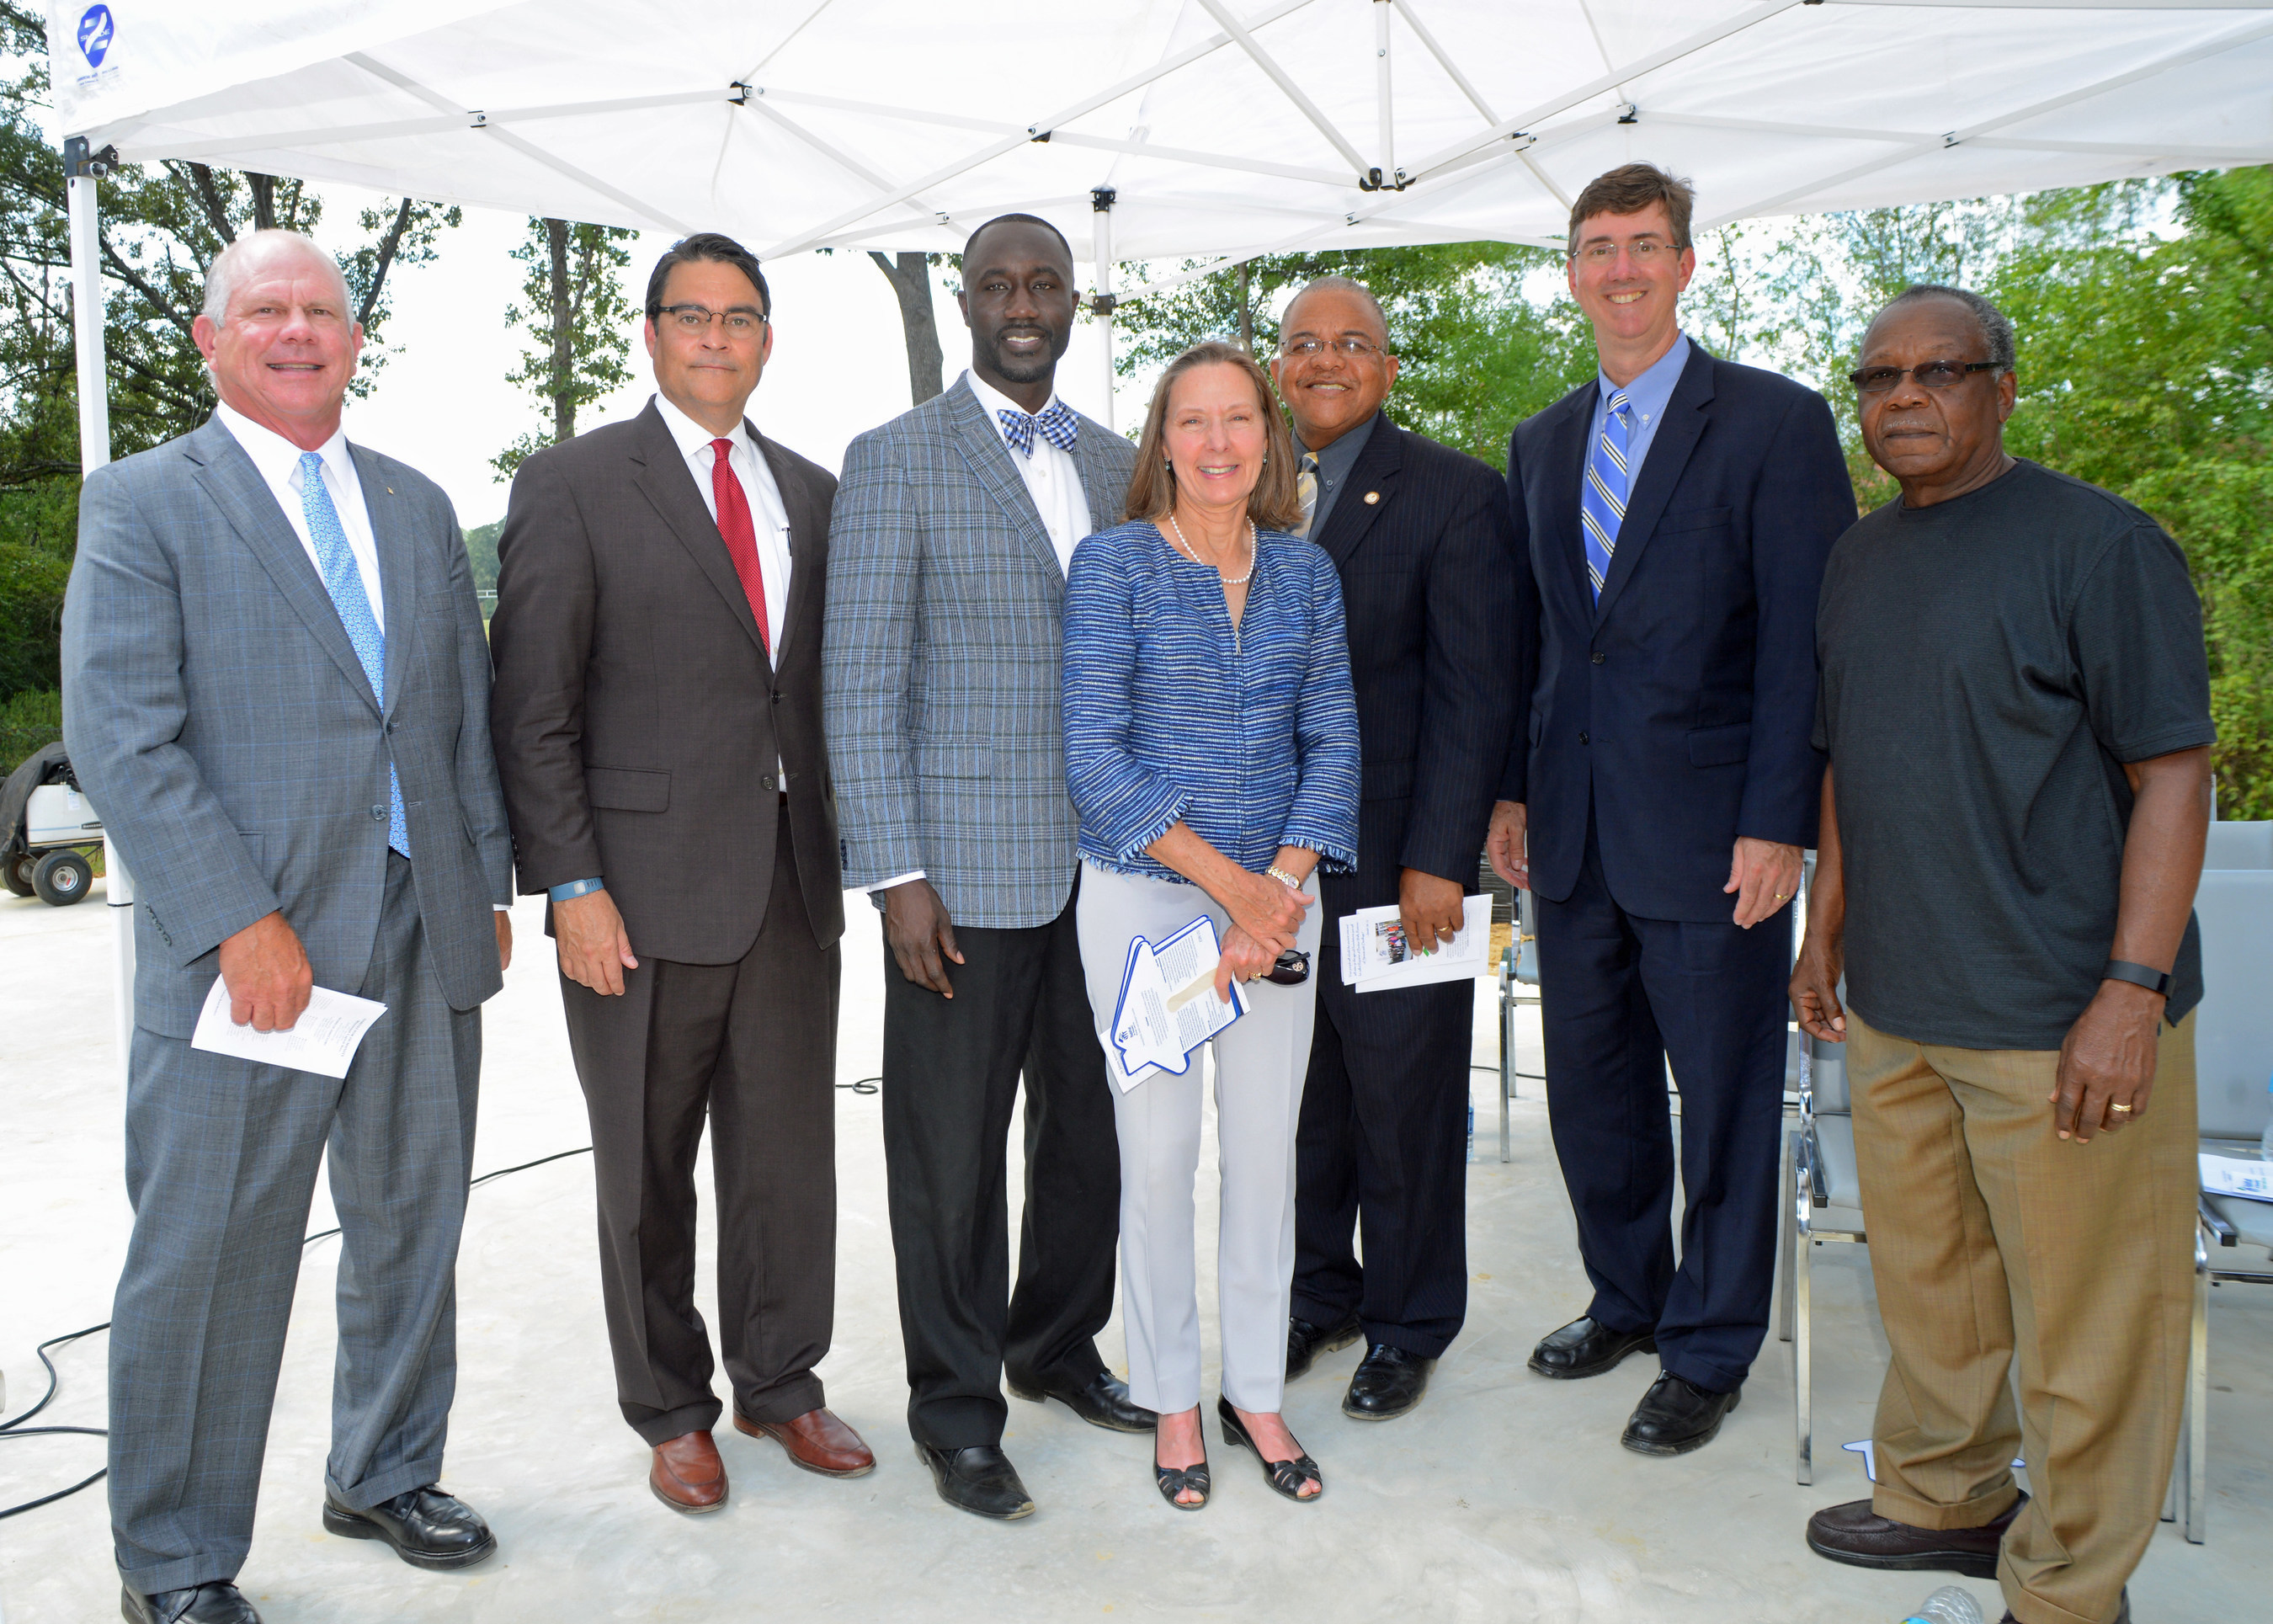 Habitat for Humanity Mississippi Capital Area was joined by Mayor Tony Yarber and representatives from FHLB Dallas to announce the start of revitalization efforts for a blighted area of Jackson, Miss.